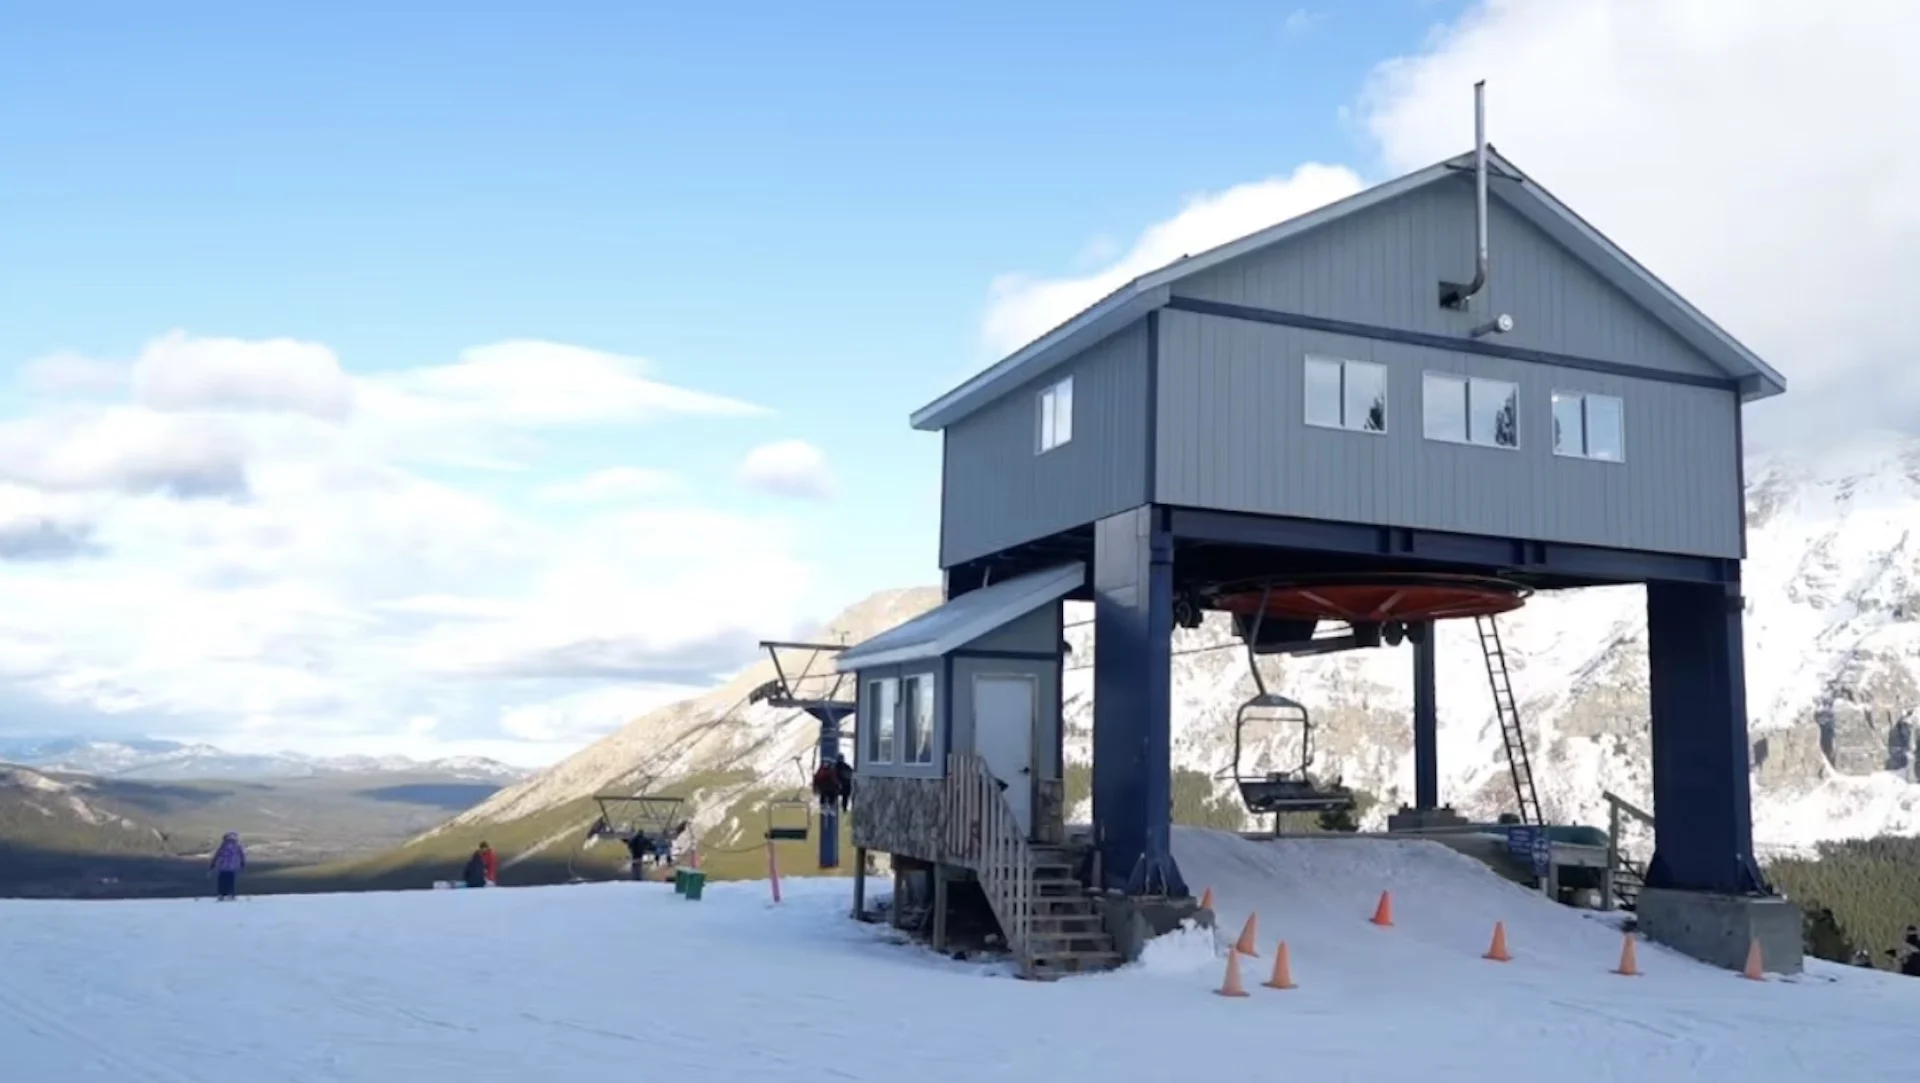 How Alberta ski hills are coping with a lack of snow 